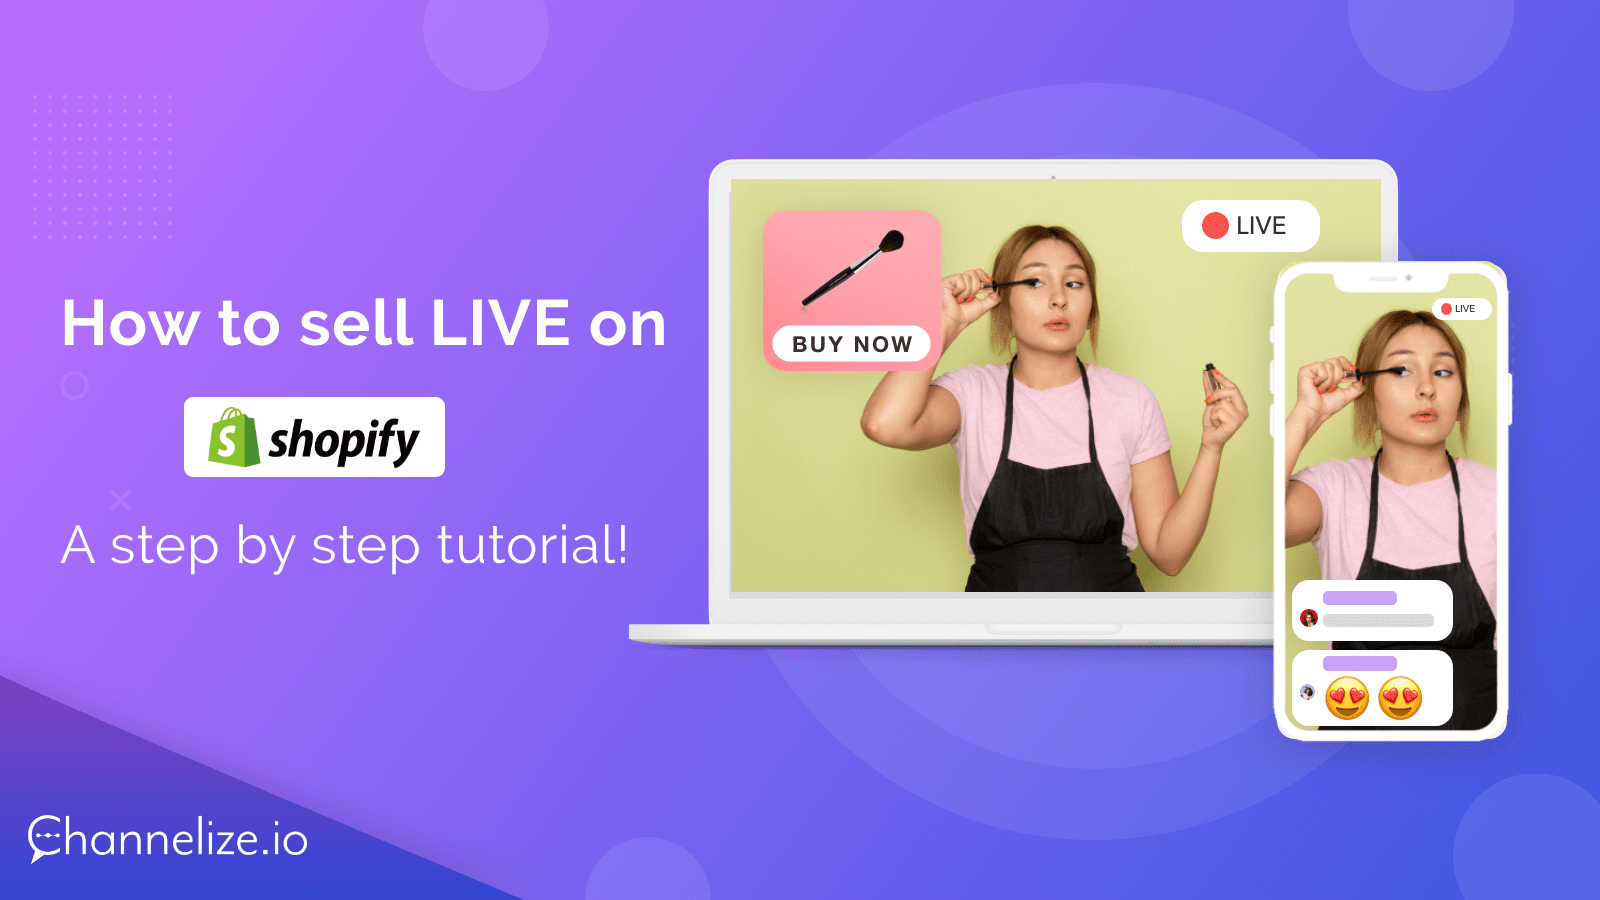 How to sell live on Shopify - A step by step tutorial!